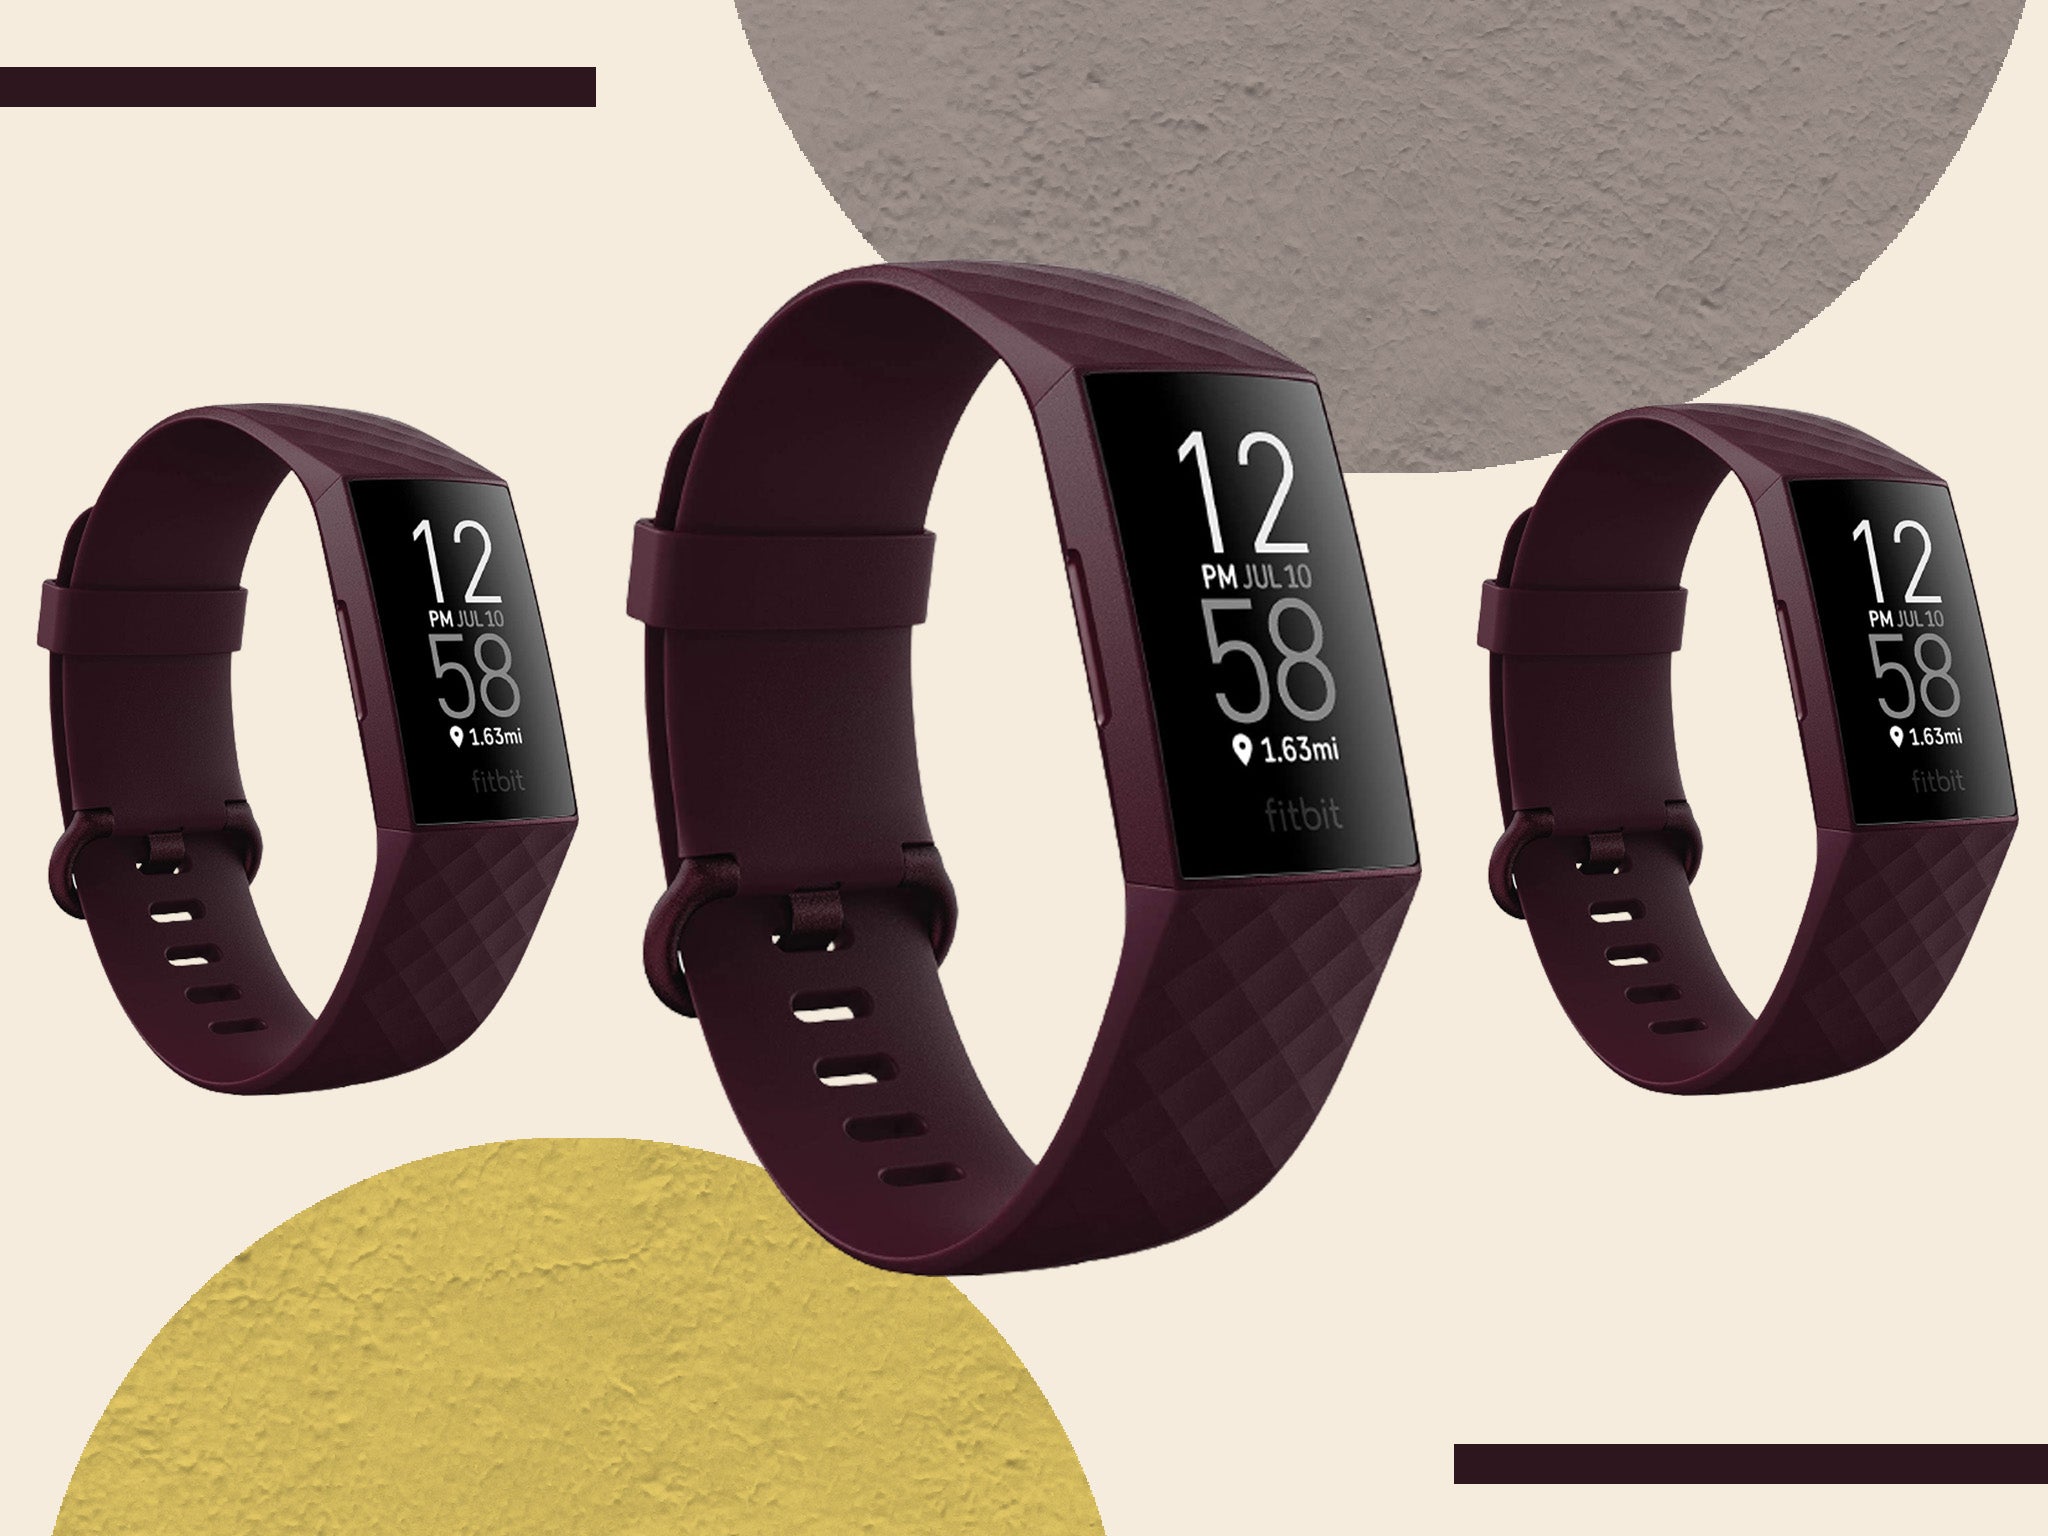 The ultimate fitness tracker just got even better